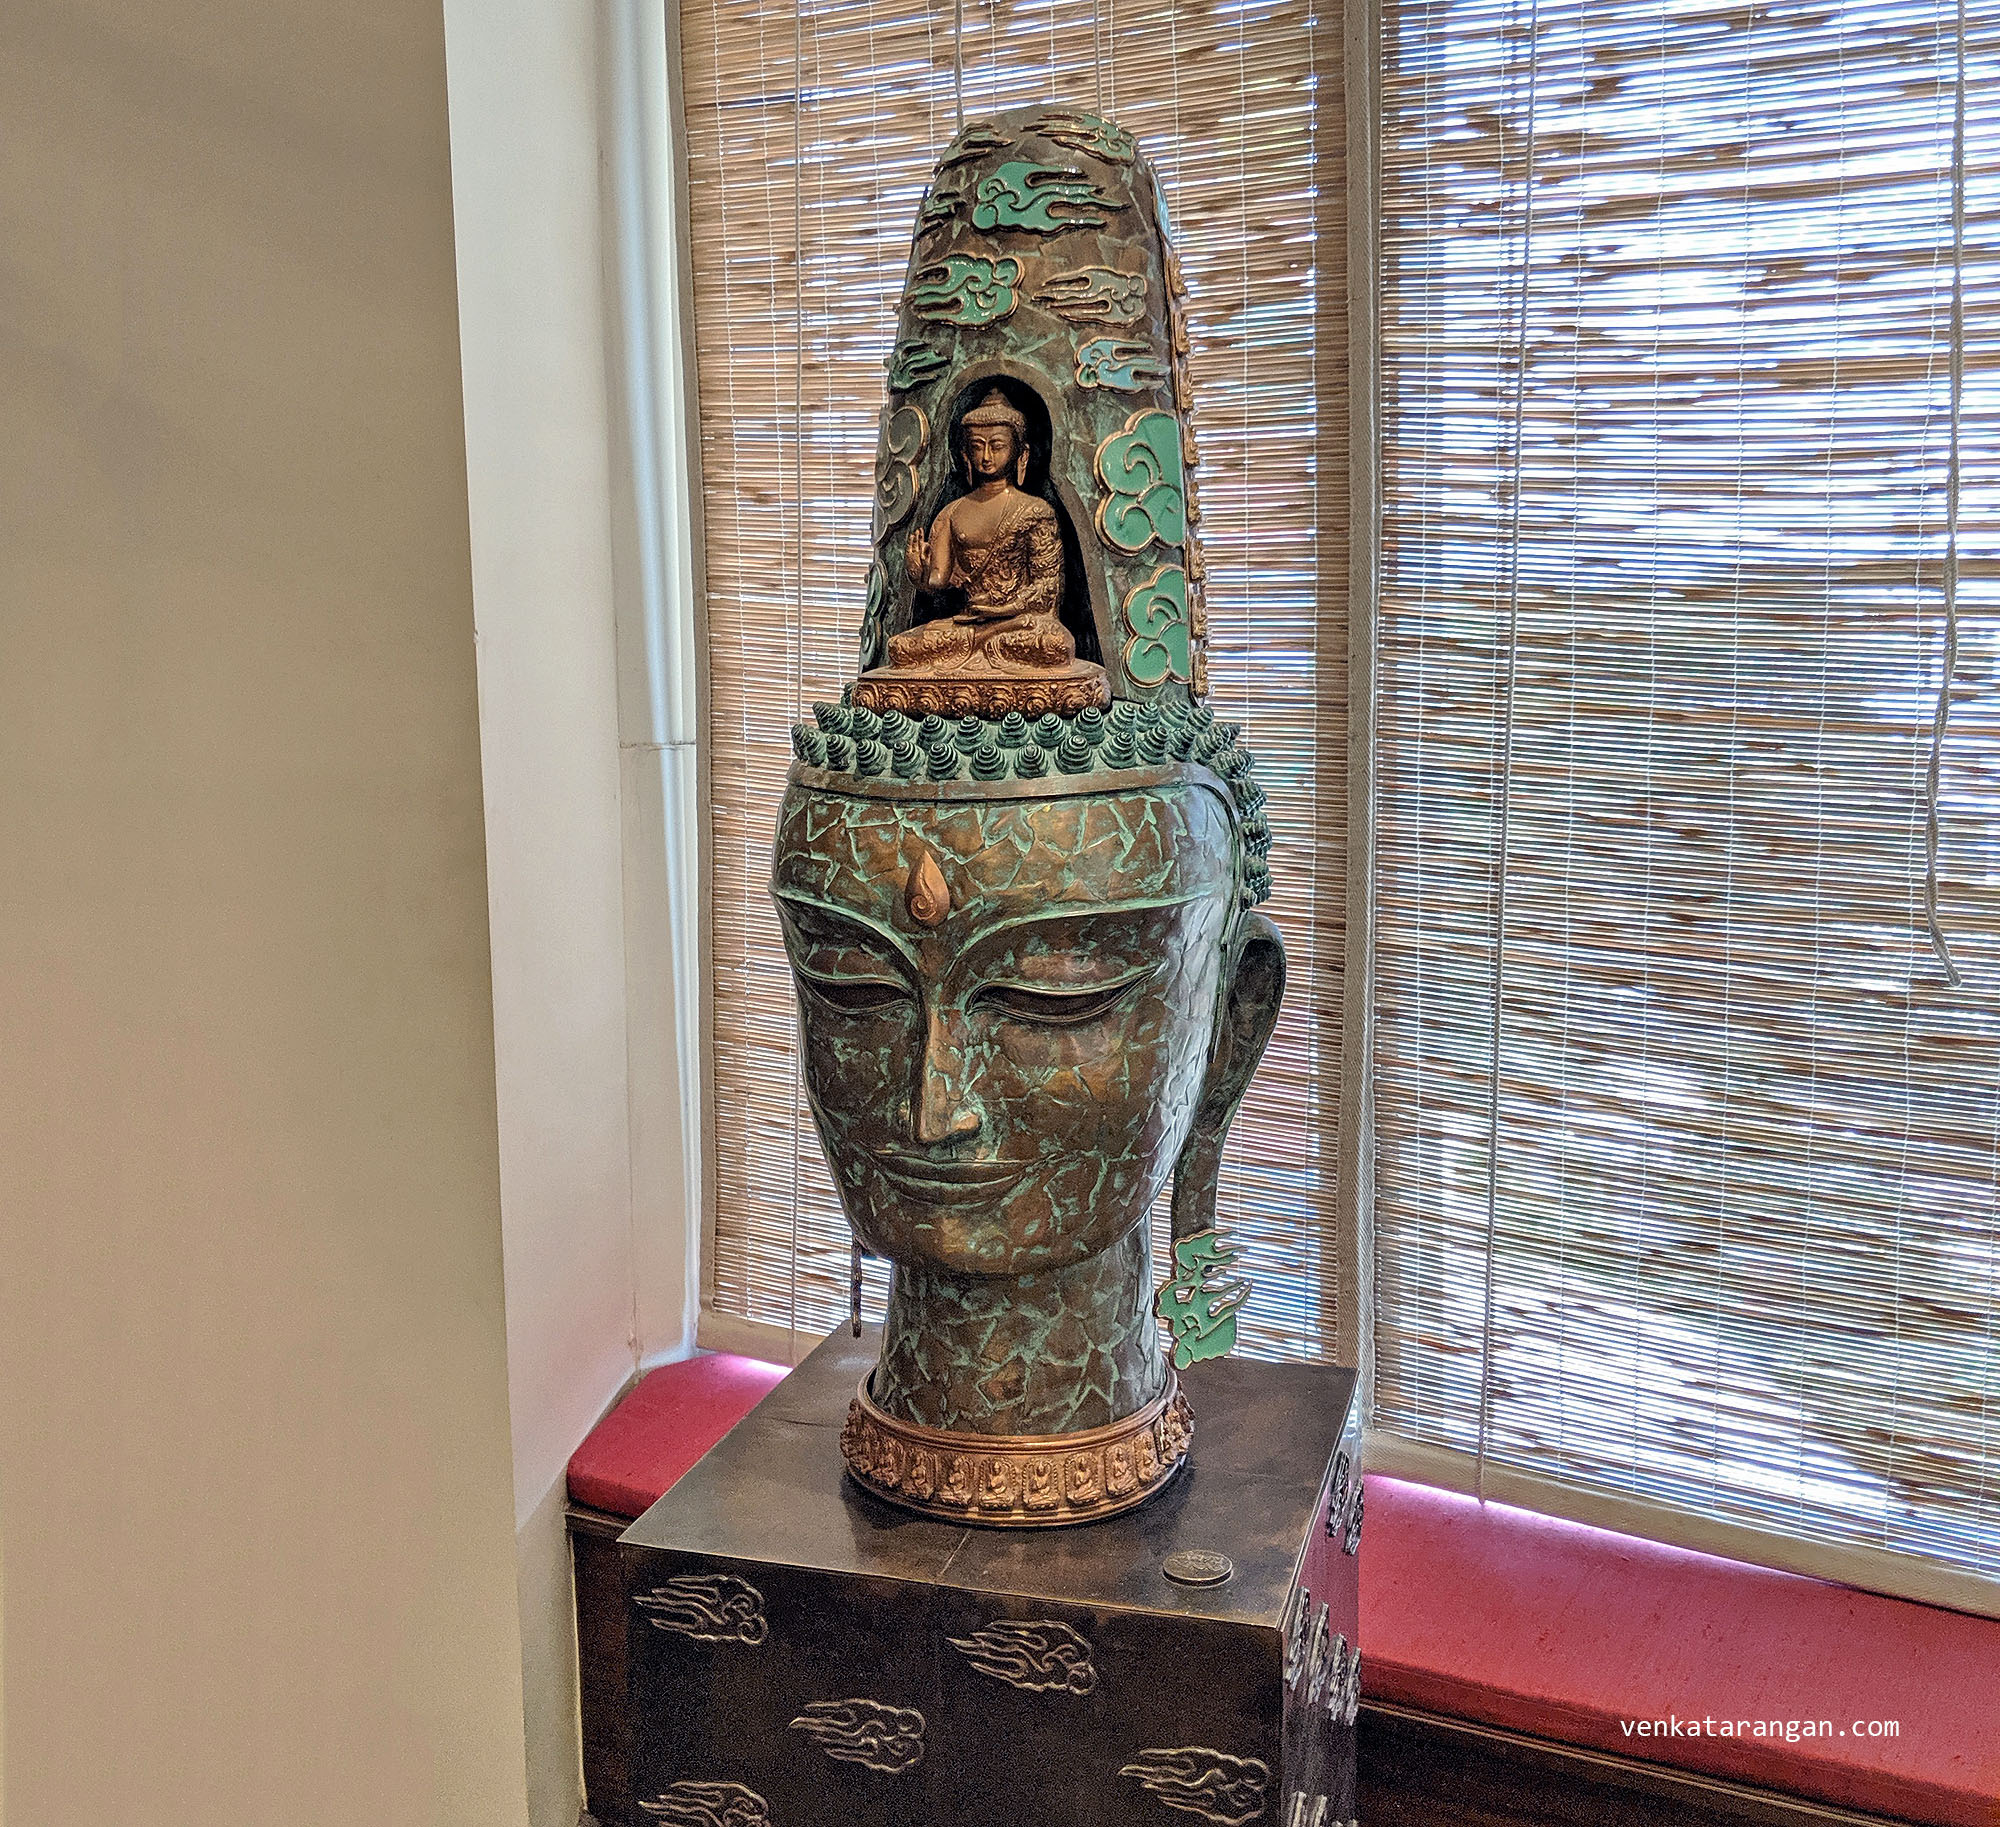 Dasavaratharam - 9. Lord Buddha is represented by a 7 feet 6 inches sculpture in the building adjacent to the main mall near The Hive. Lord Buddha is considered to be a part of Dasavartharam by many works including those of Jayadeva and Anamaacharya 